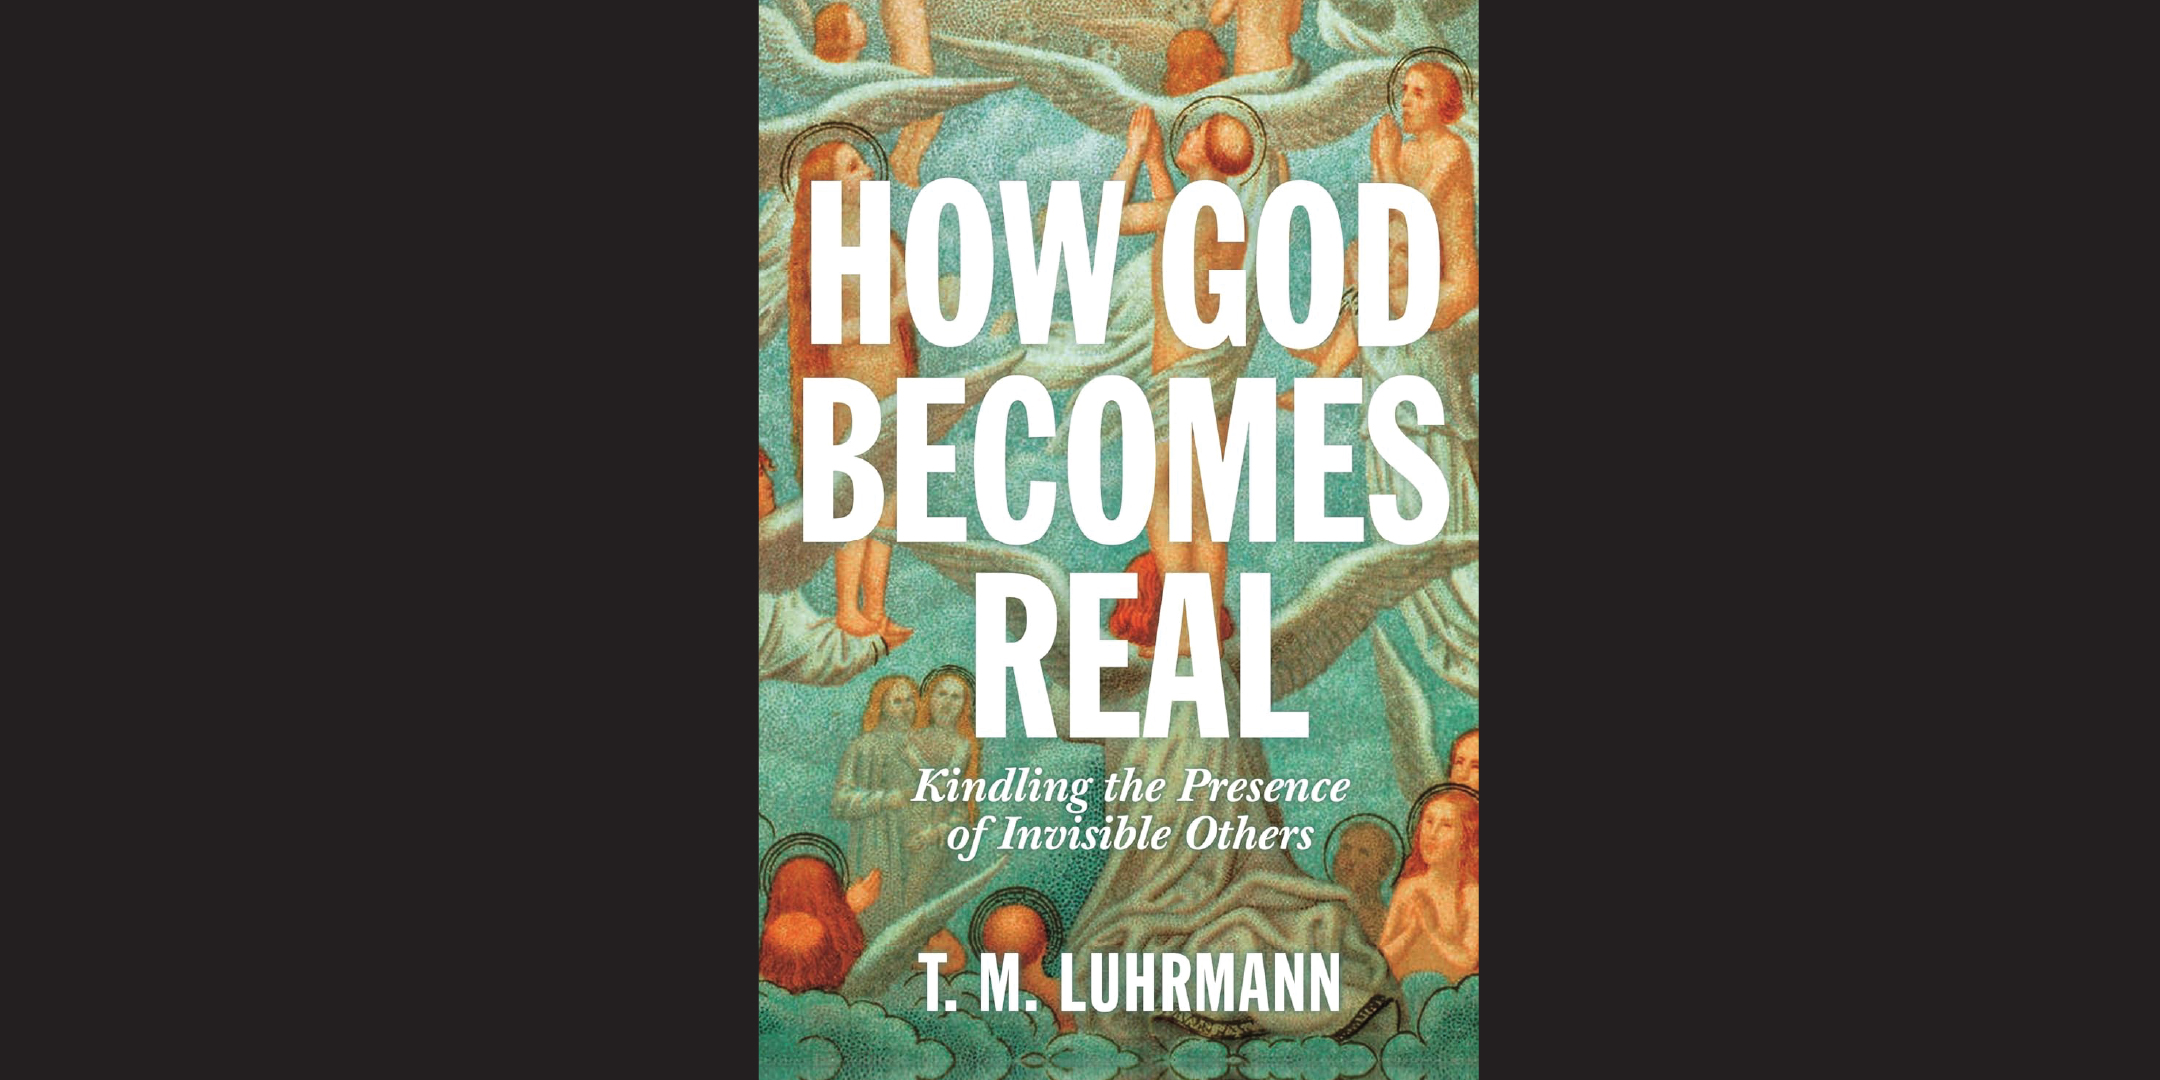 School for Advanced Research Awards the 2024 J. I. Staley Prize to T. M. Luhrmann for “How God Becomes Real”